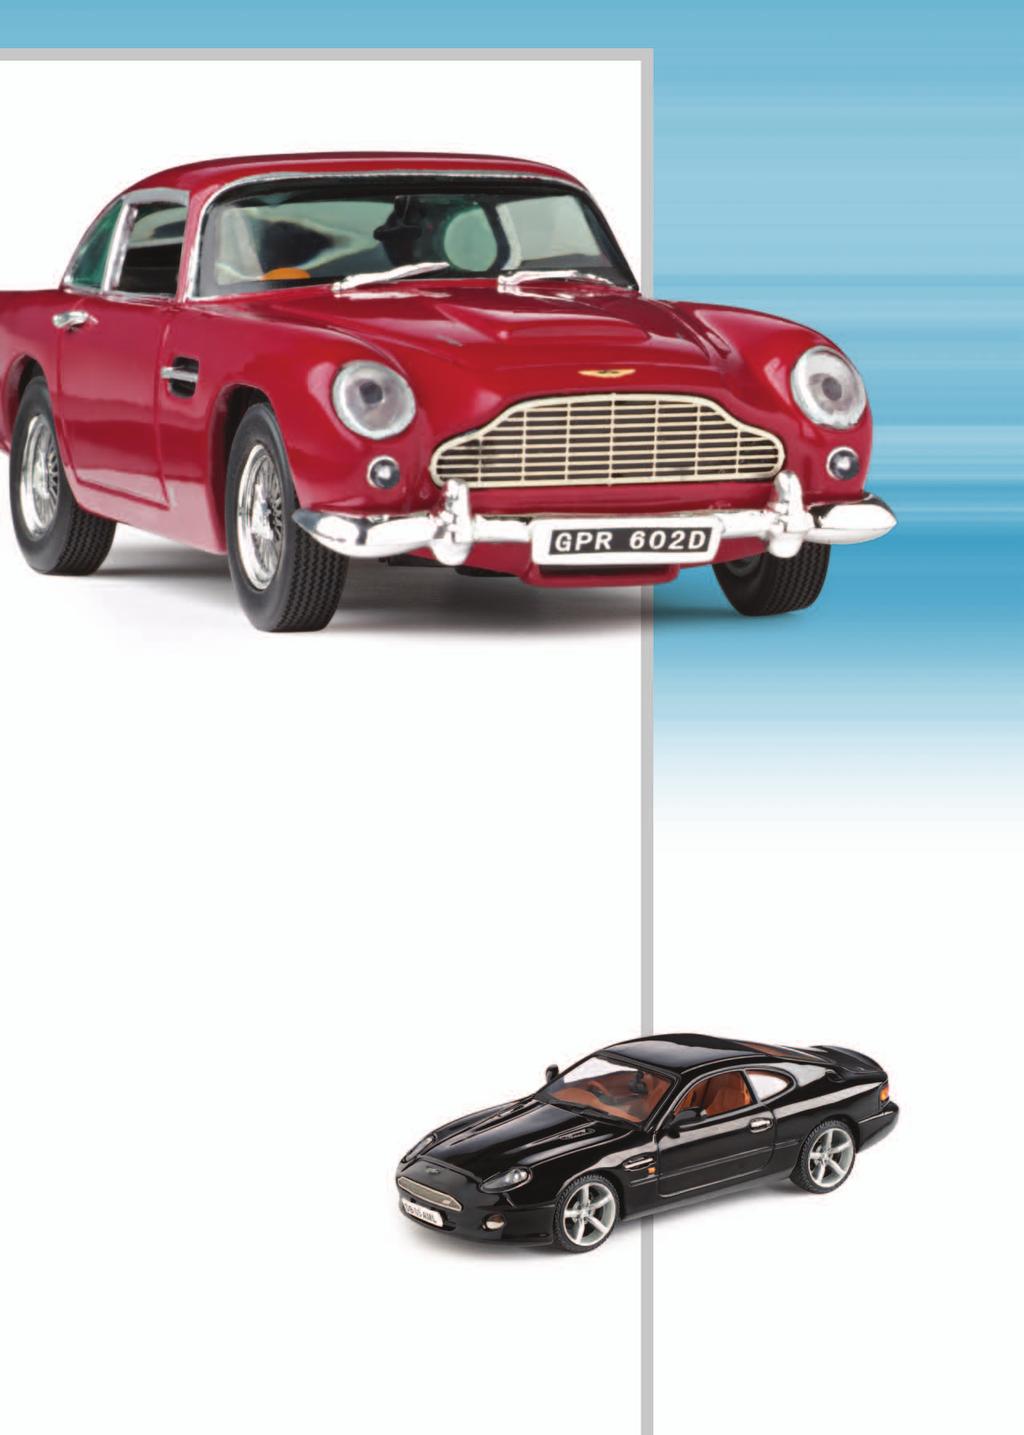 1:43 SCALE This is a range of carefully selected British classics featuring famous names such as Aston Martin, Austin, Daimler, Mini and Mini Moke.